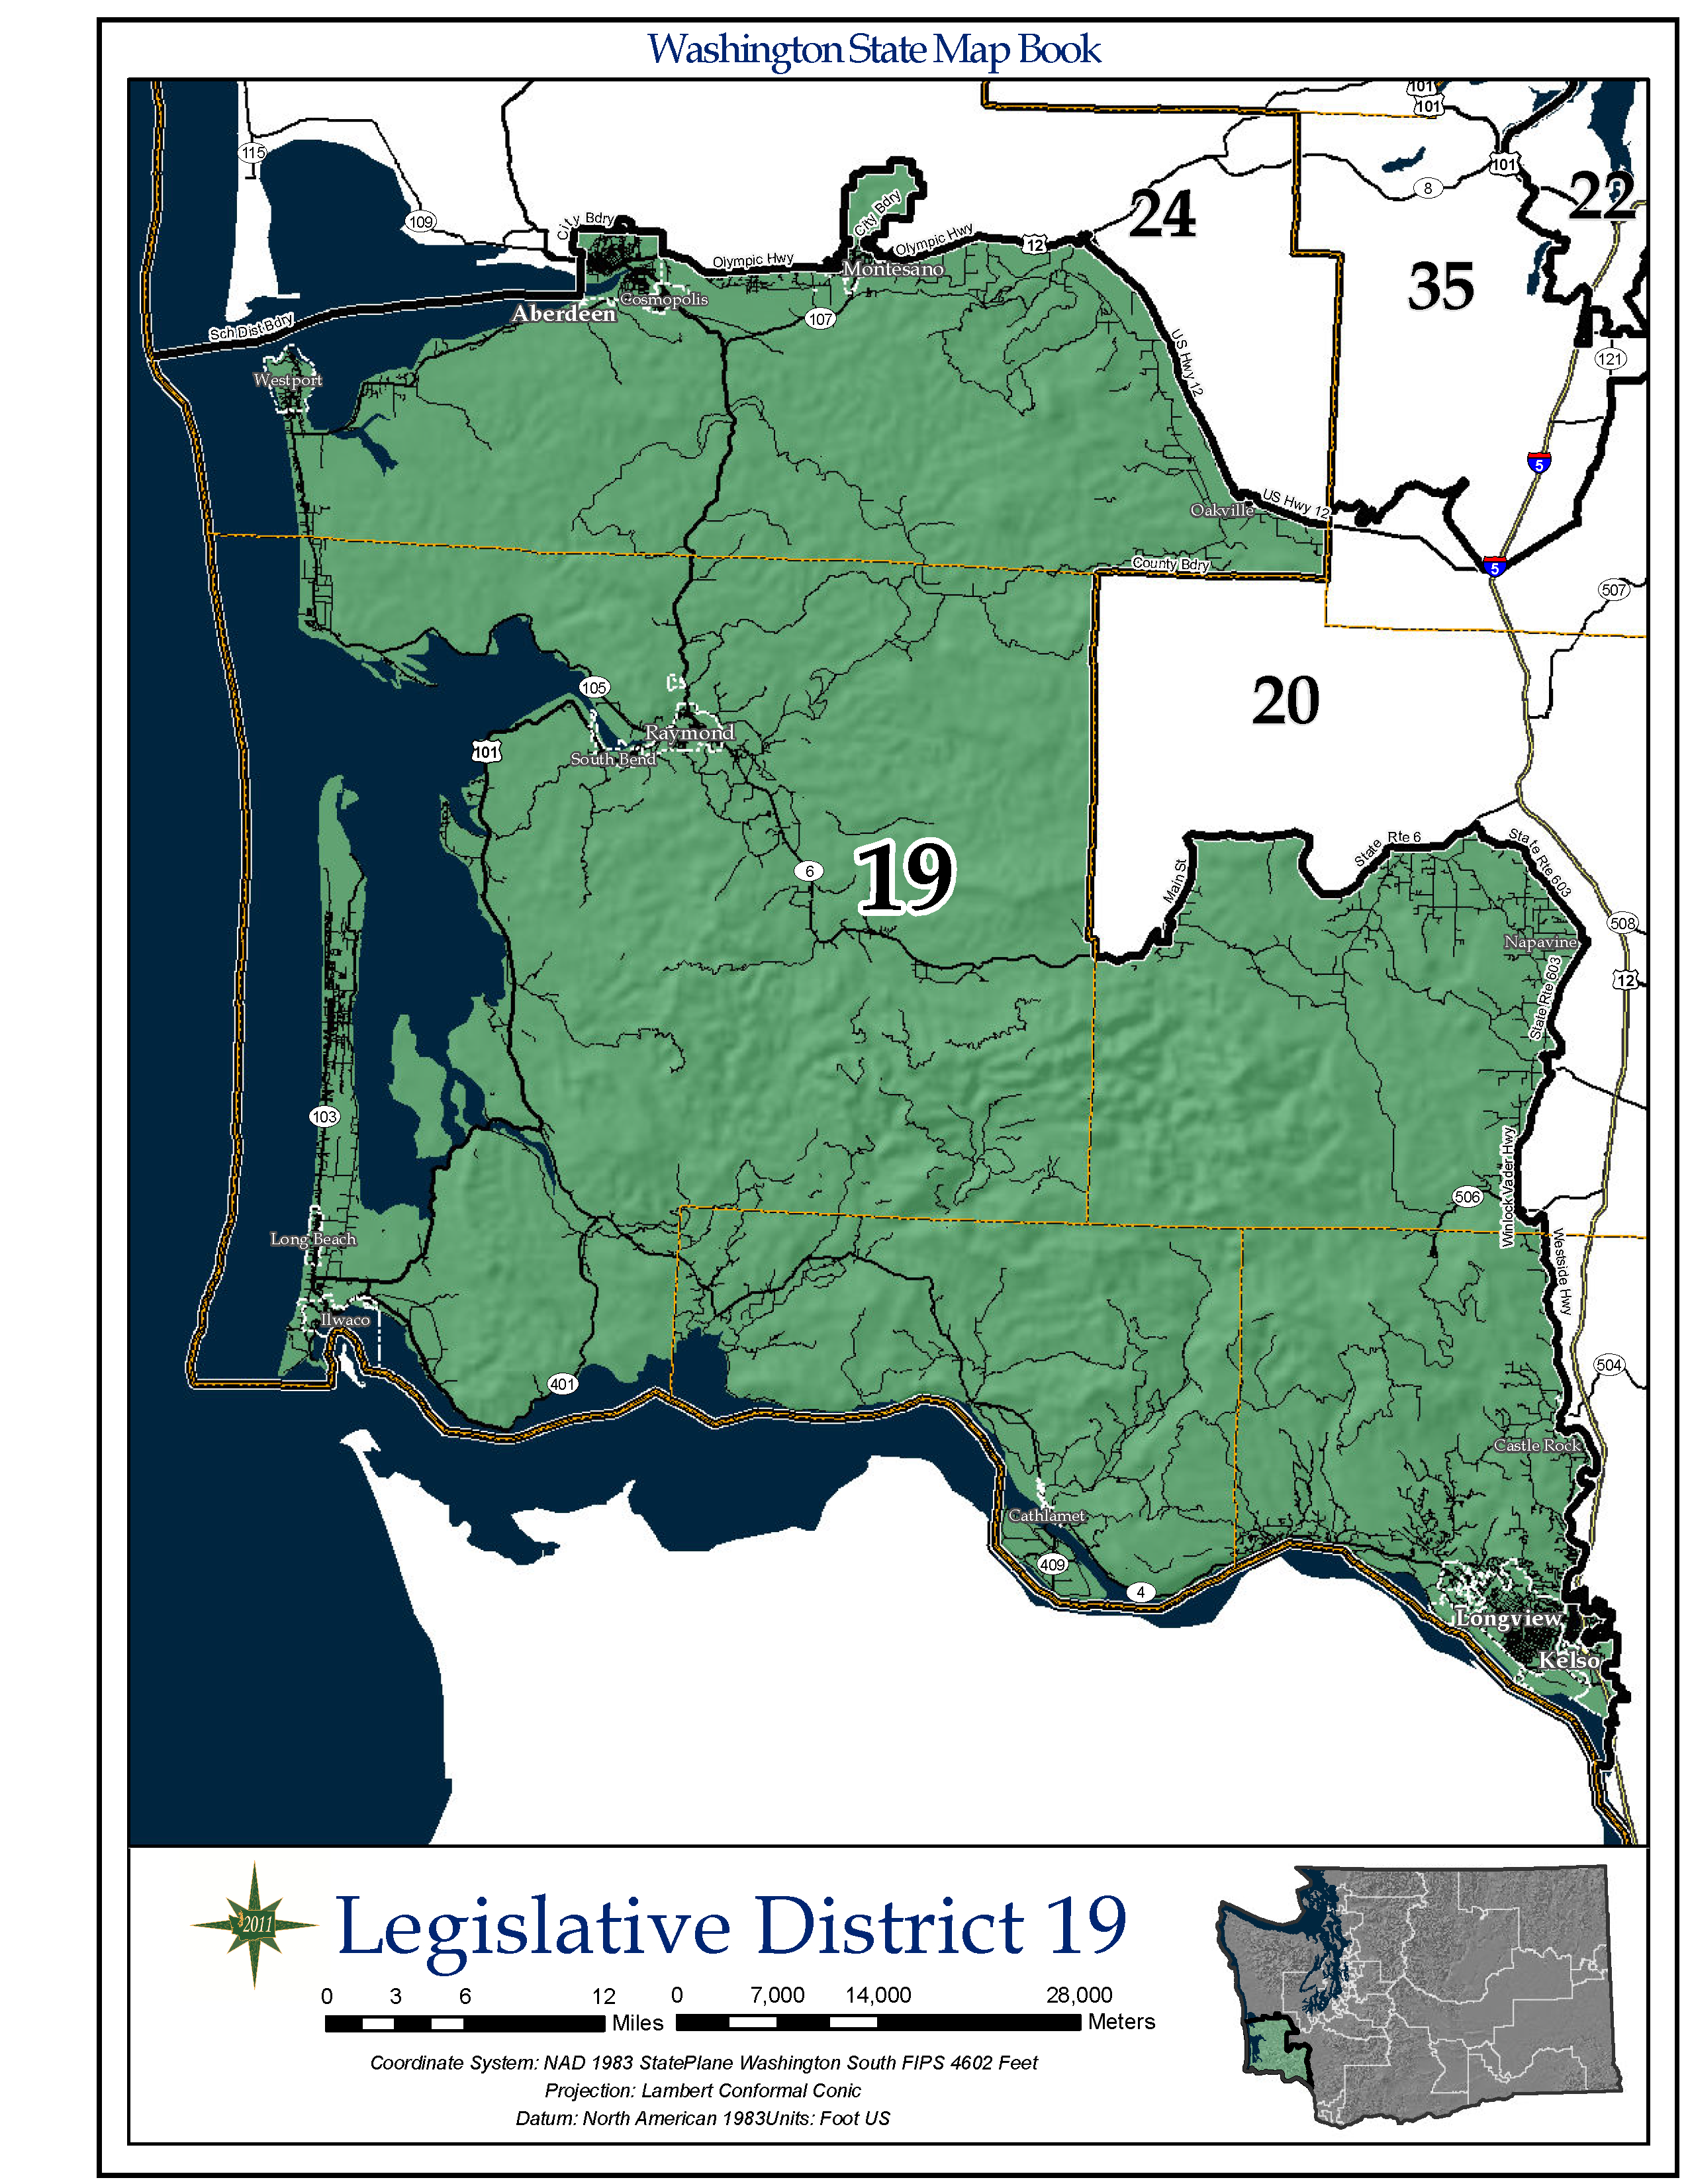 Outline of the 19th Legislative District